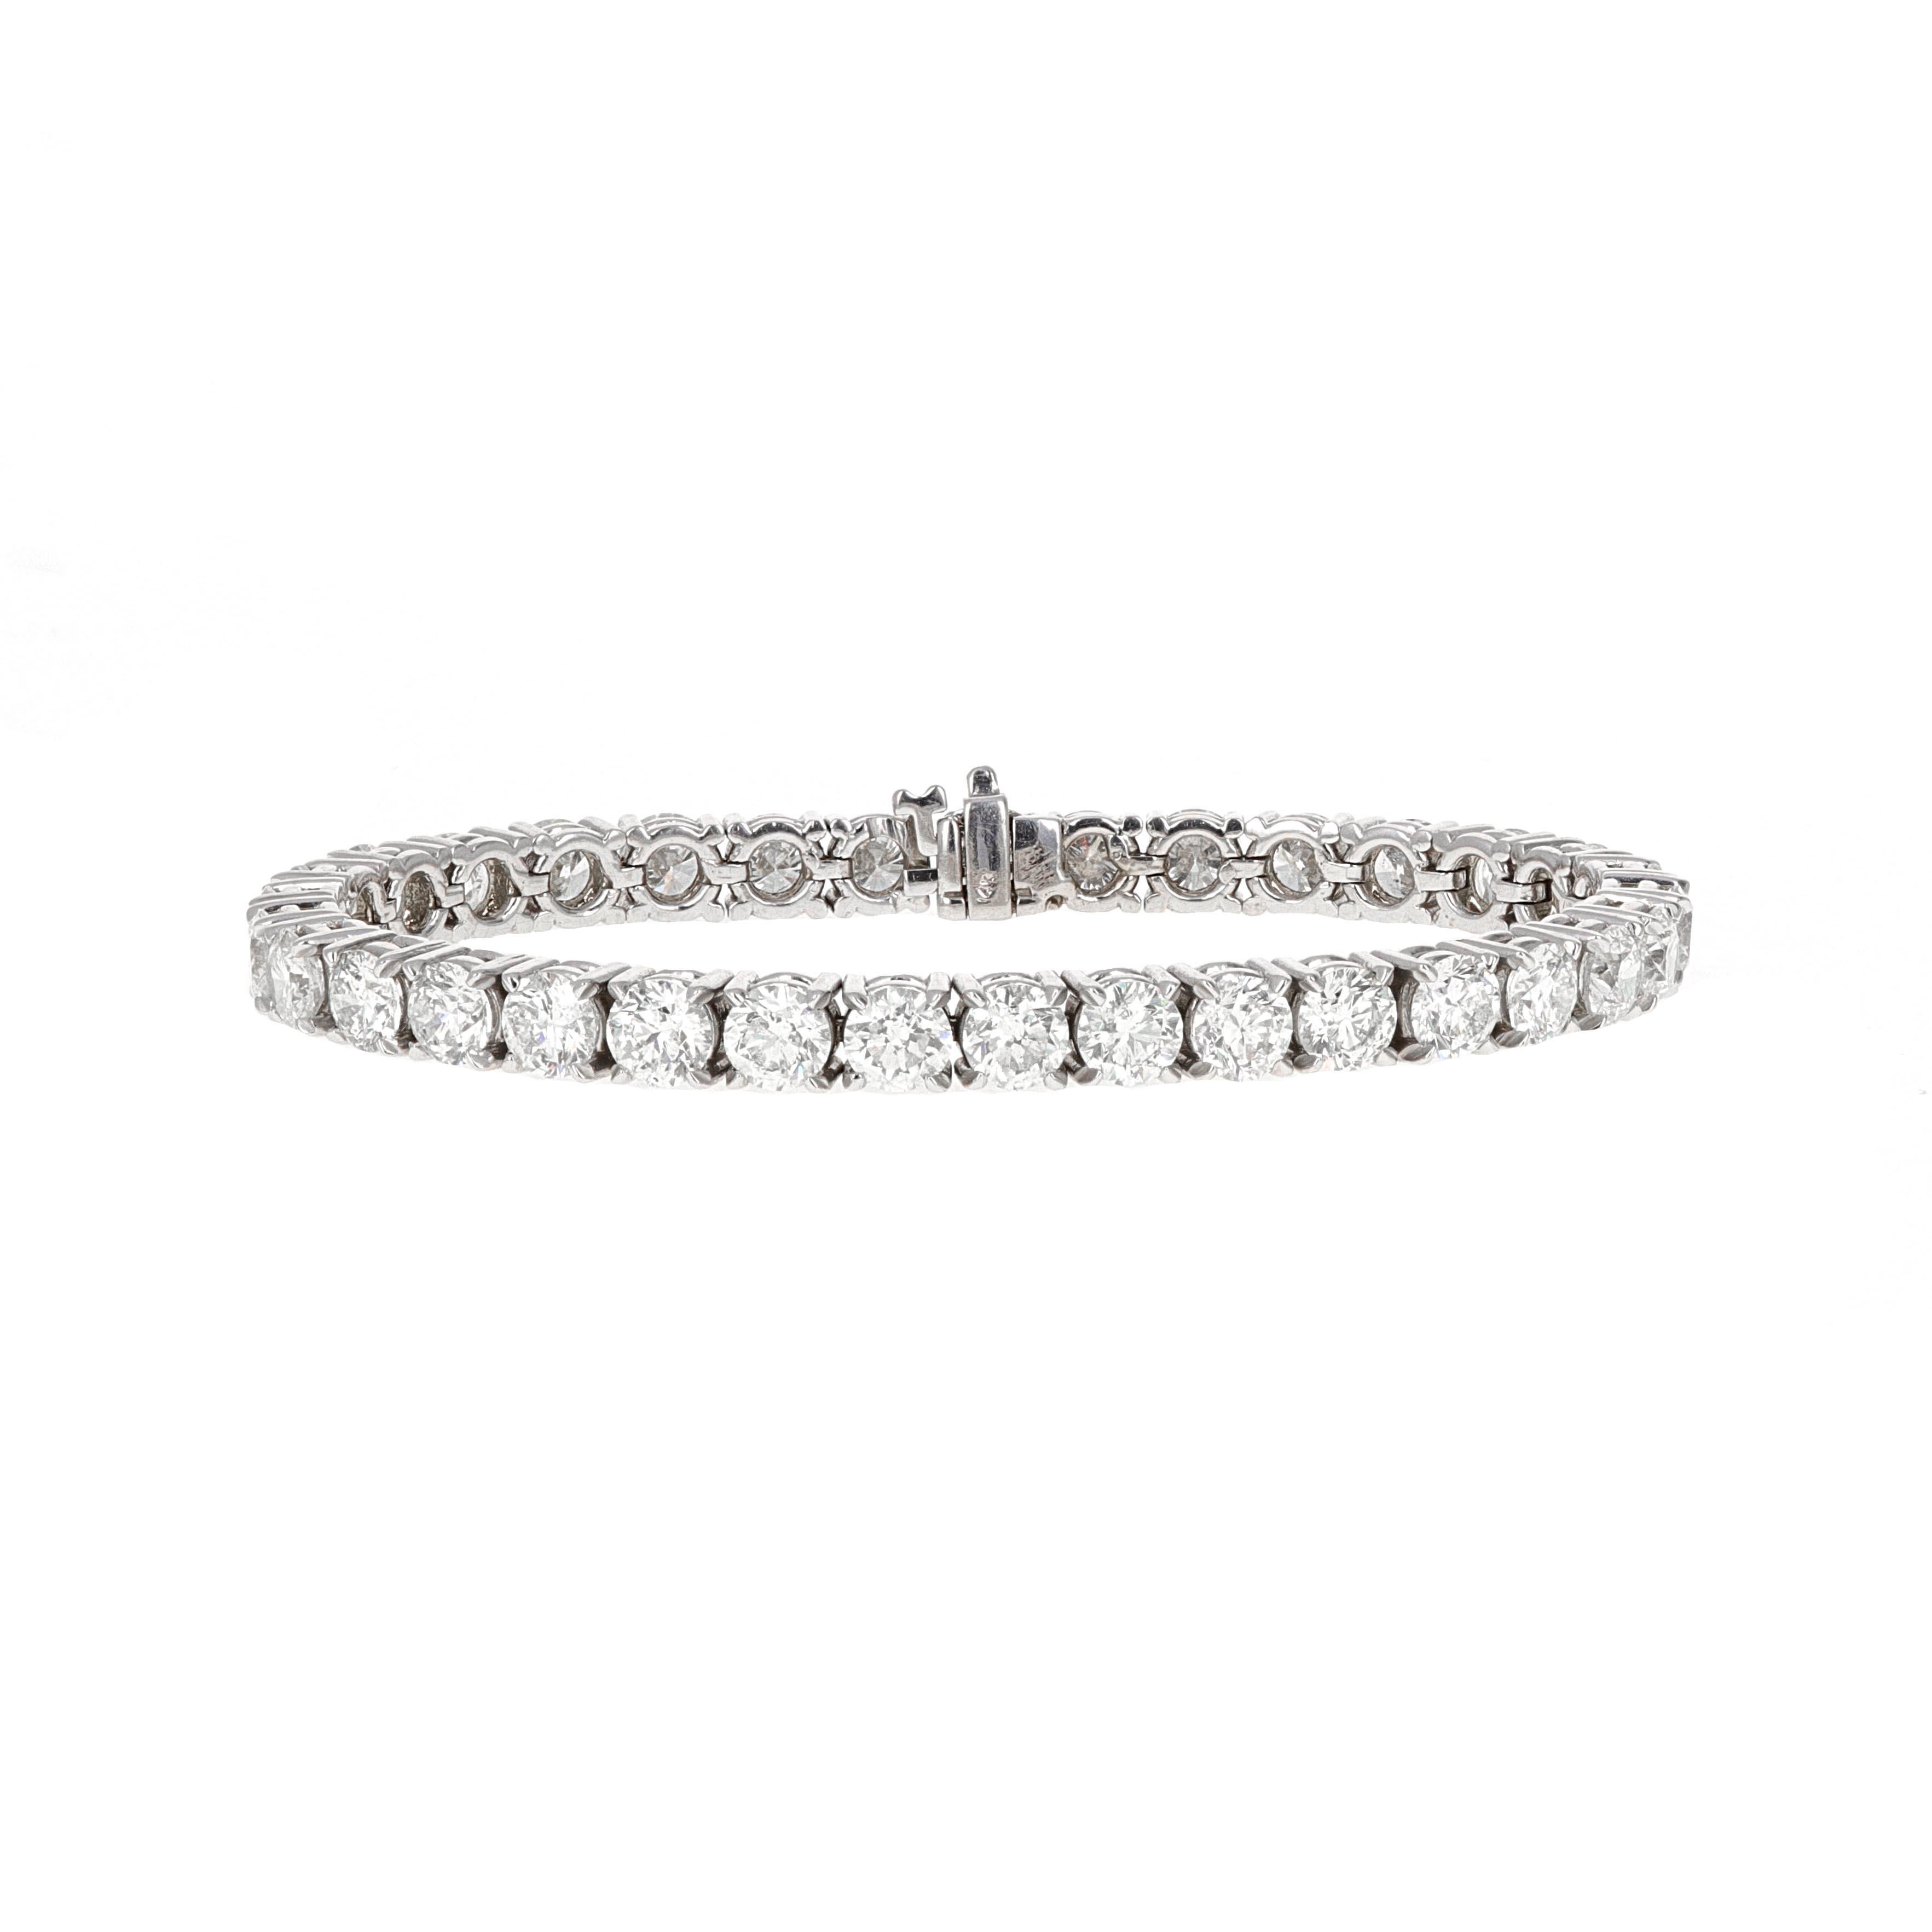 17.78 carat total weight, white gold diamond tennis bracelet. The bracelet has 33 round brilliant diamonds each weighing over 0.50 carats each. The stones are white in color and eye clean. 

The bracelet is made in 14 karat white gold.

